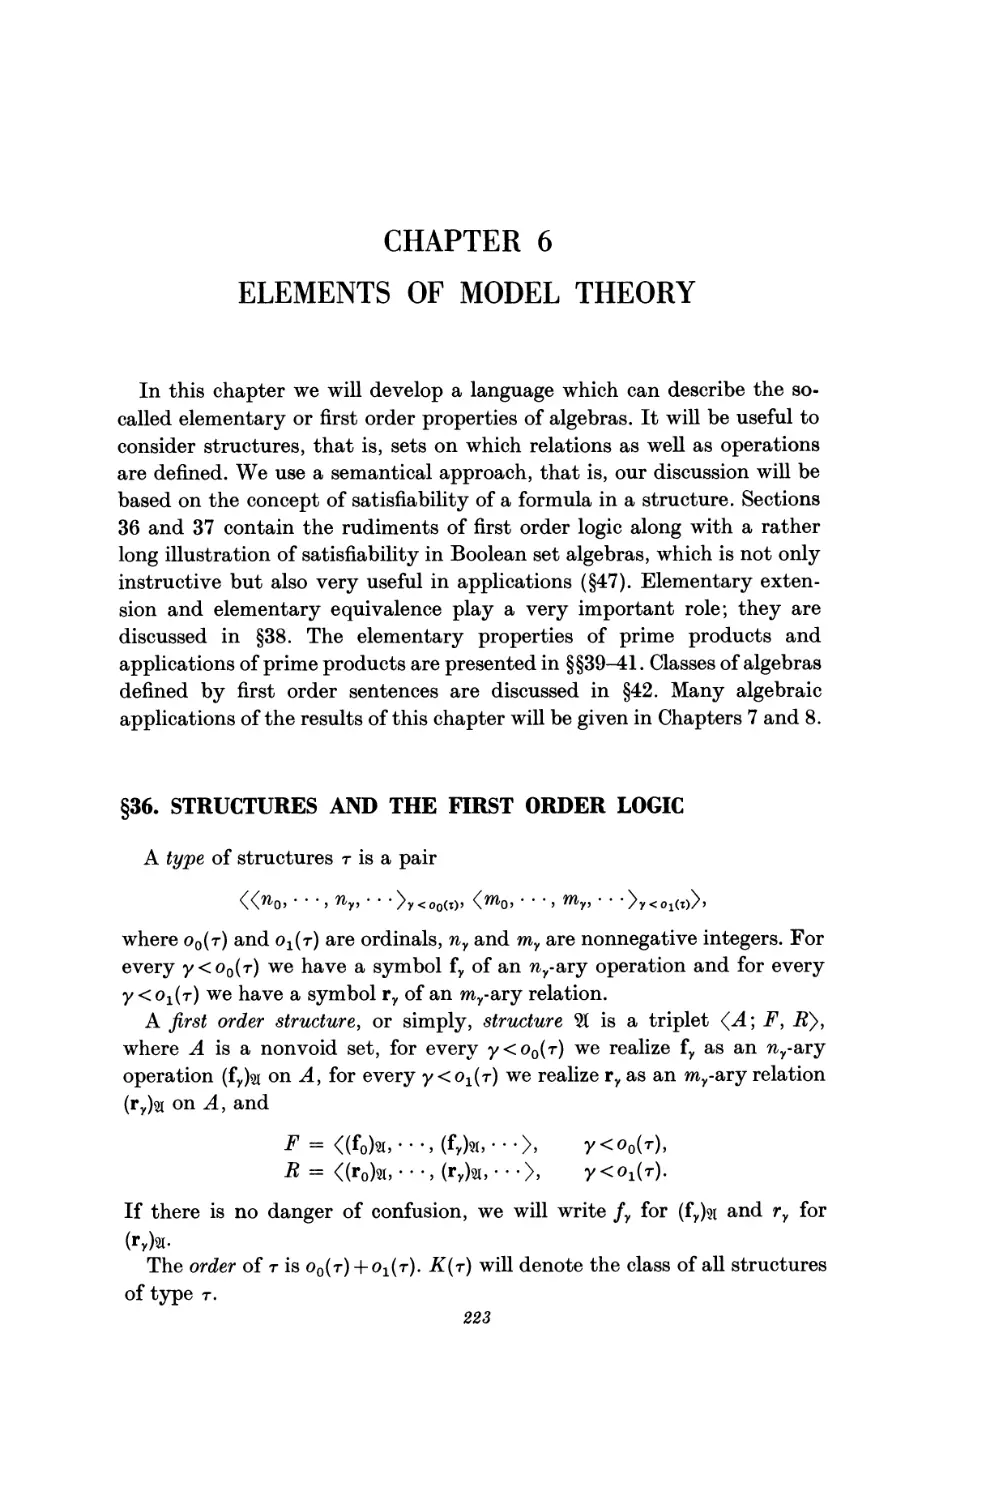 Chapter 6. Elements of Model Theory